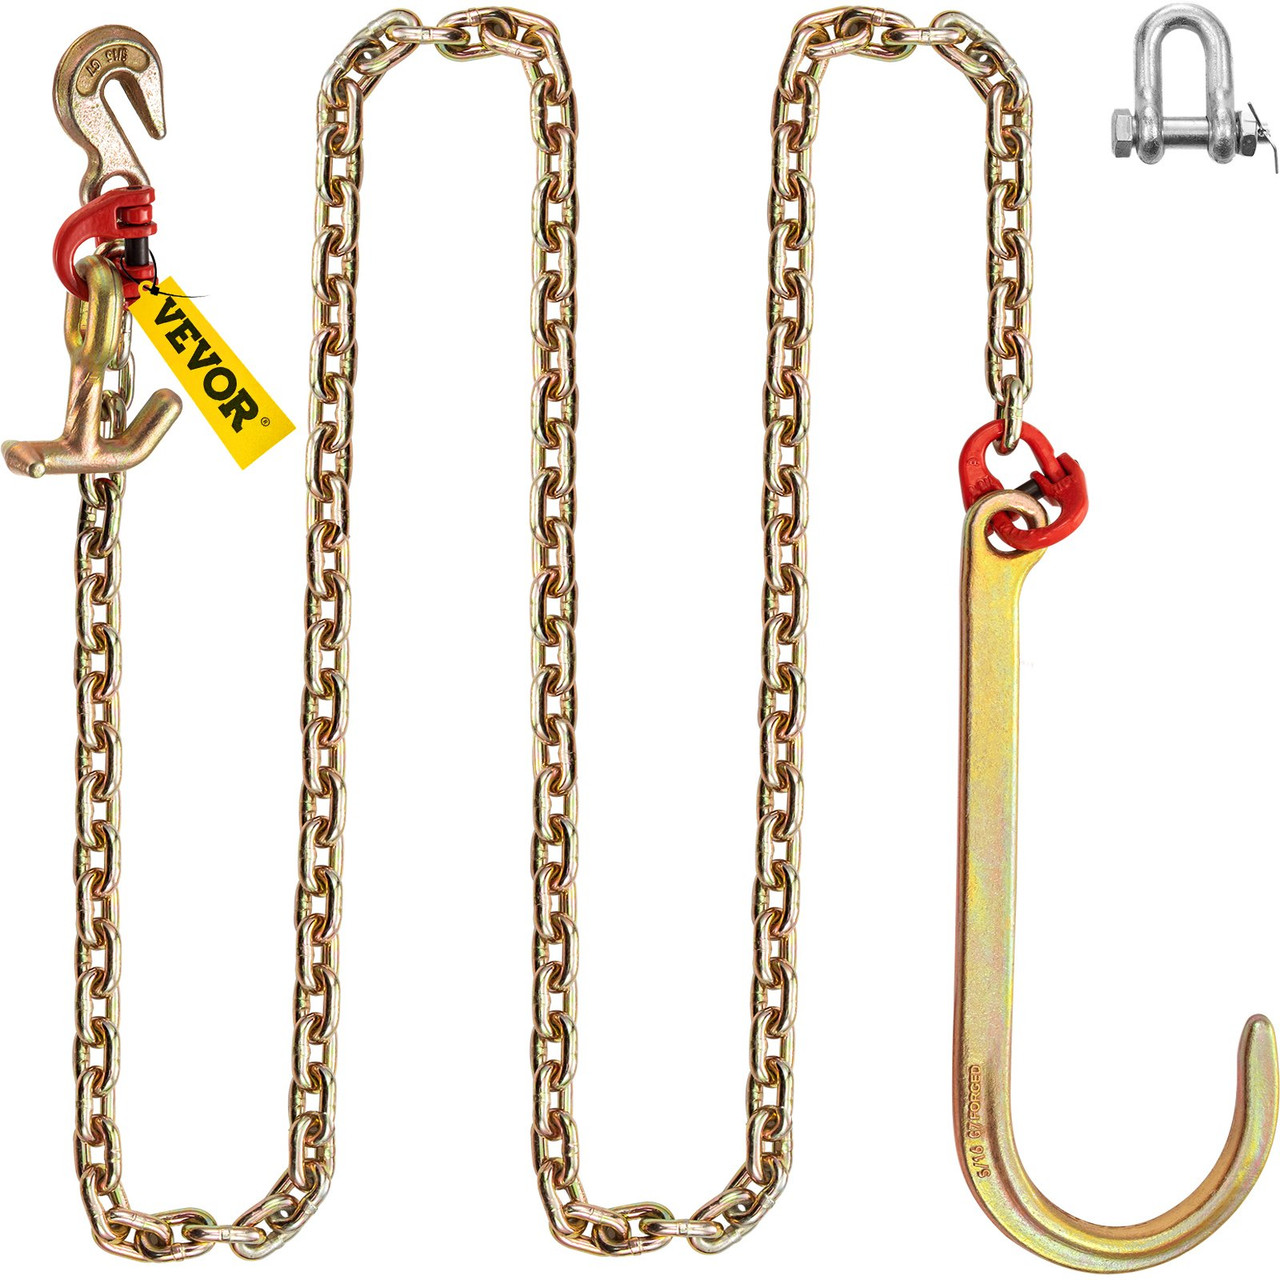 J Hook Chain, 5/16 in x 10 ft Bridle Tow Chain, Grade 80 Bridle Transport Chain, Alloy Steel Chain with J Hook, Safe J Hooks Towing Strap, 9260 Lbs Break Strength Tow Hooks for Trucks